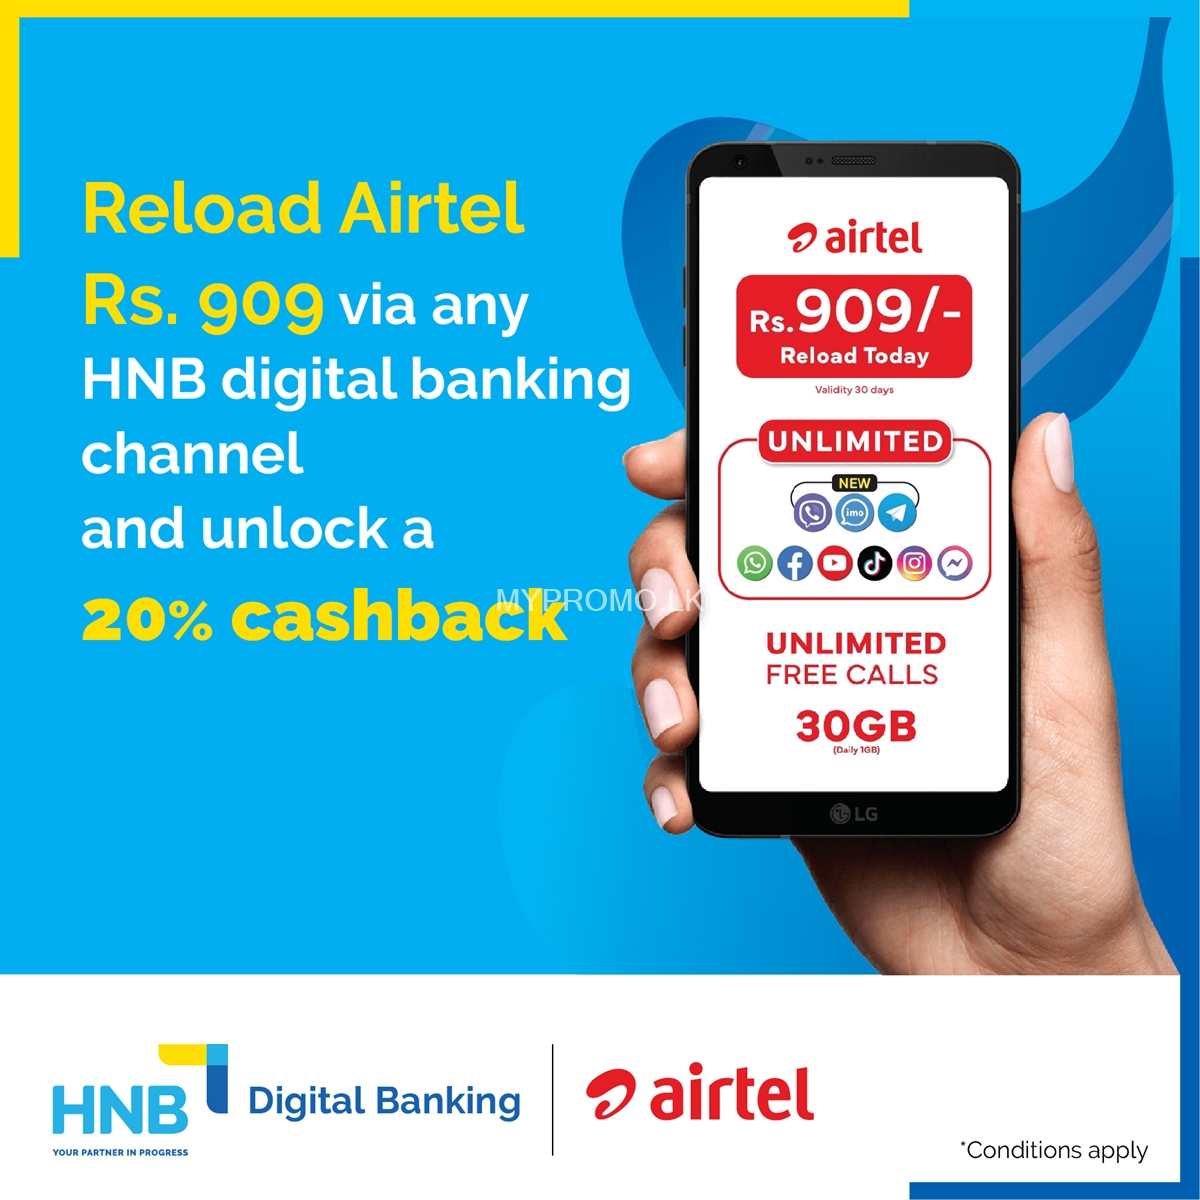 Reload your Airtel 909 connection using HNB digital banking channels and enjoy a fantastic 20% cashback